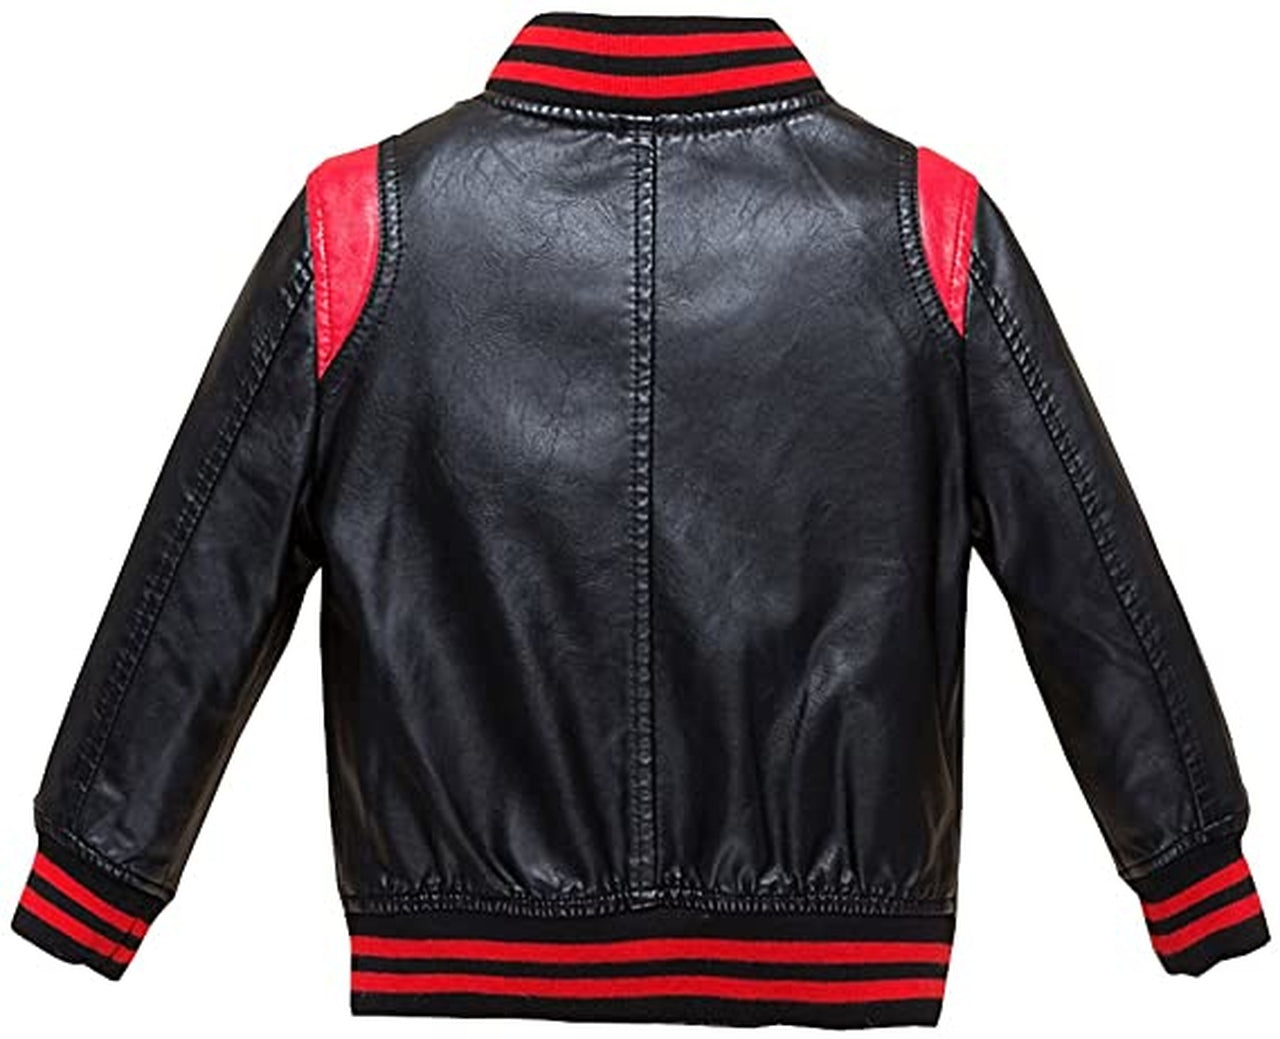 Motorcycle Style Sheepskin Jacket with Red Stripes